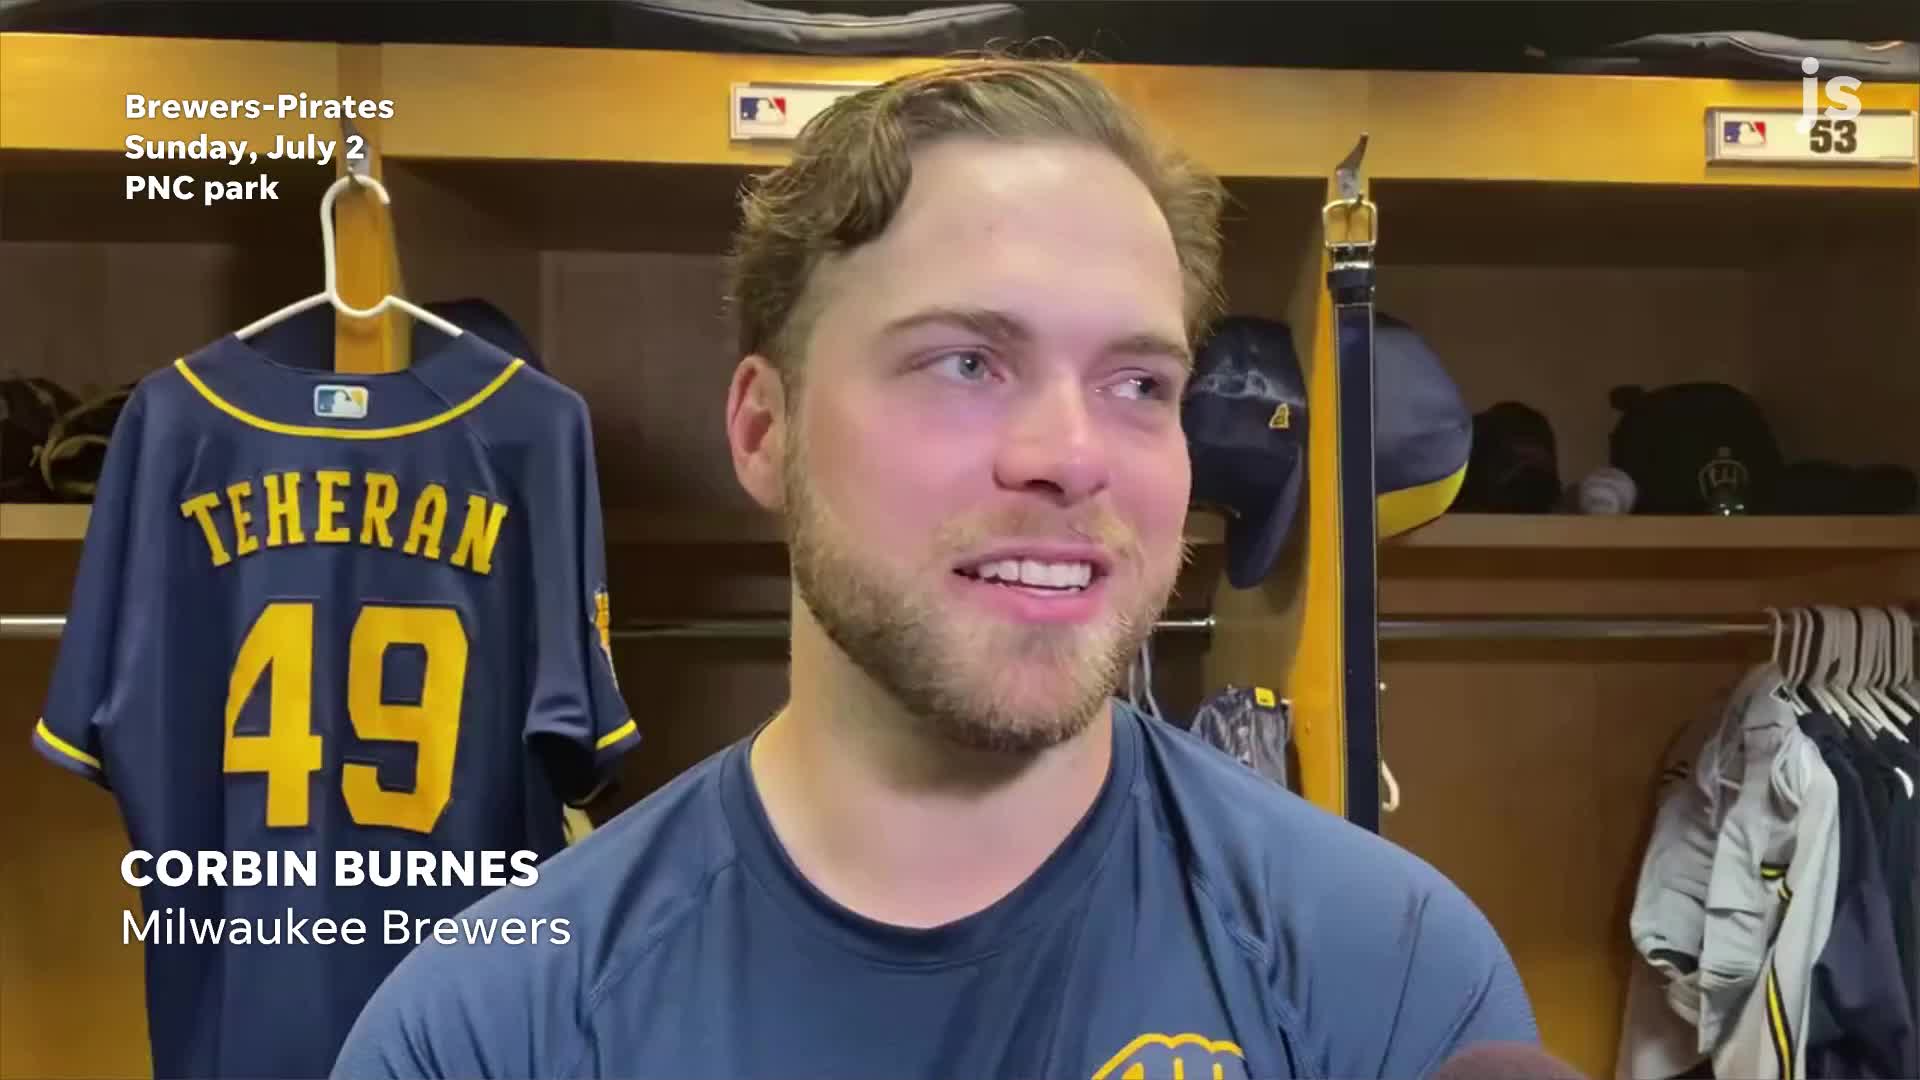 Here's what Corbin Burnes had to say about Christian Yelich's hot streak